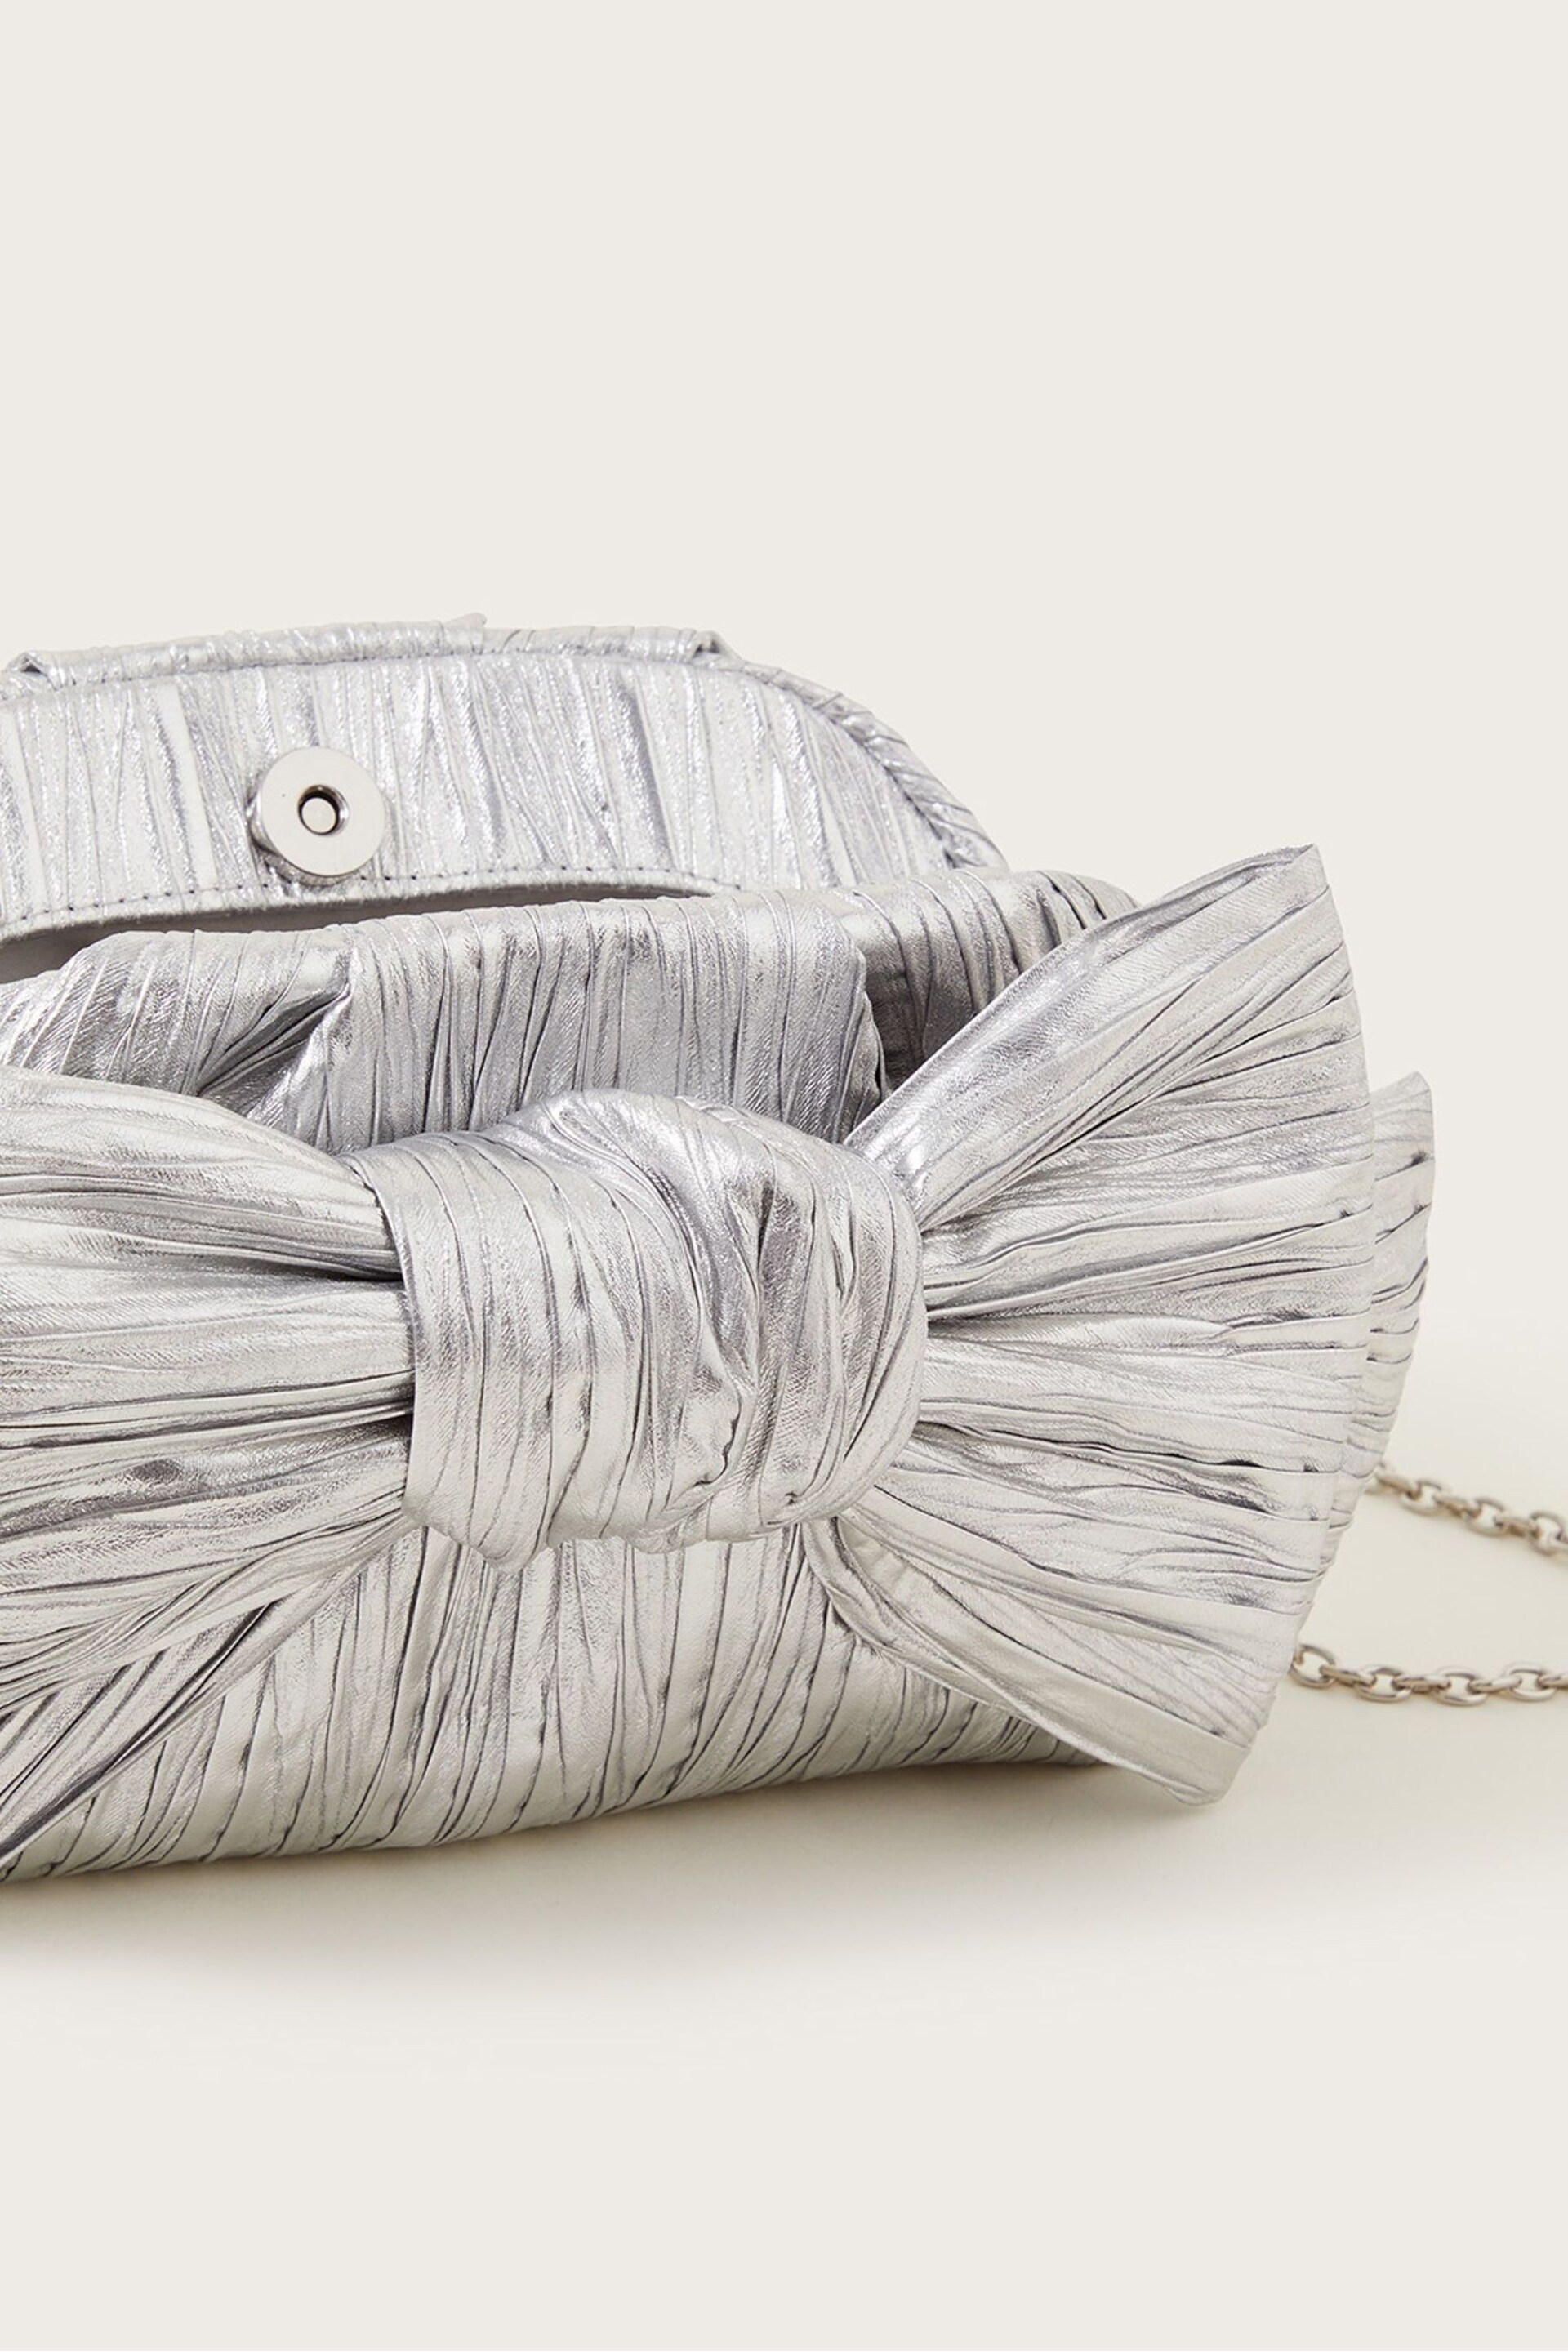 Monsoon Silver Bow Detail Bag - Image 4 of 4